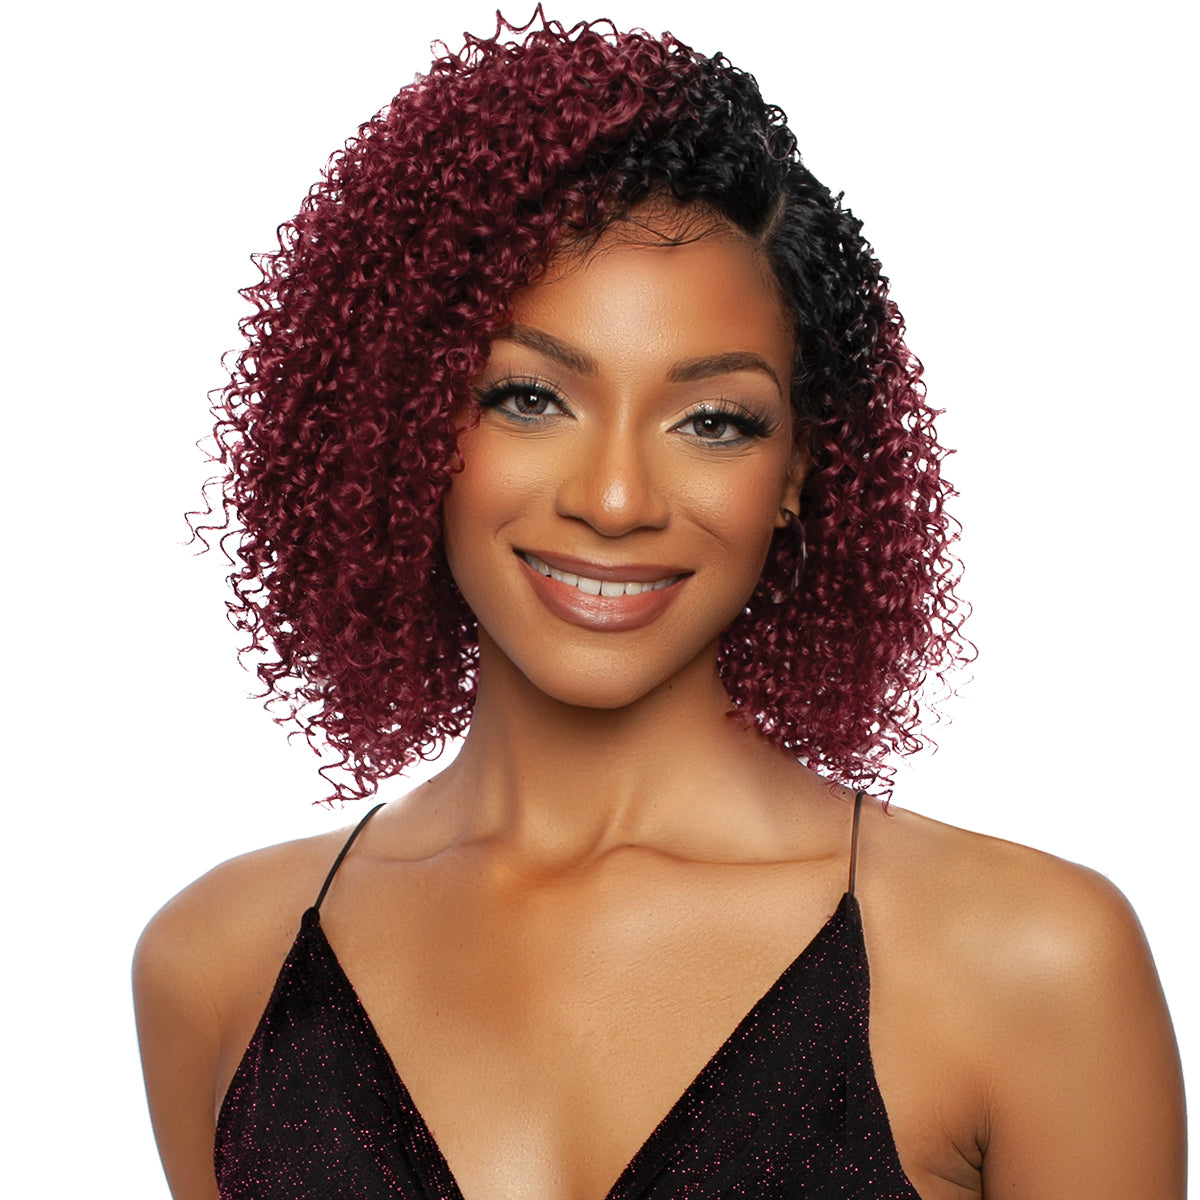 Mane Concept Red Carpet Synthetic Hair HD Lace Front Wig - RCHD284 SUMMER CURLS